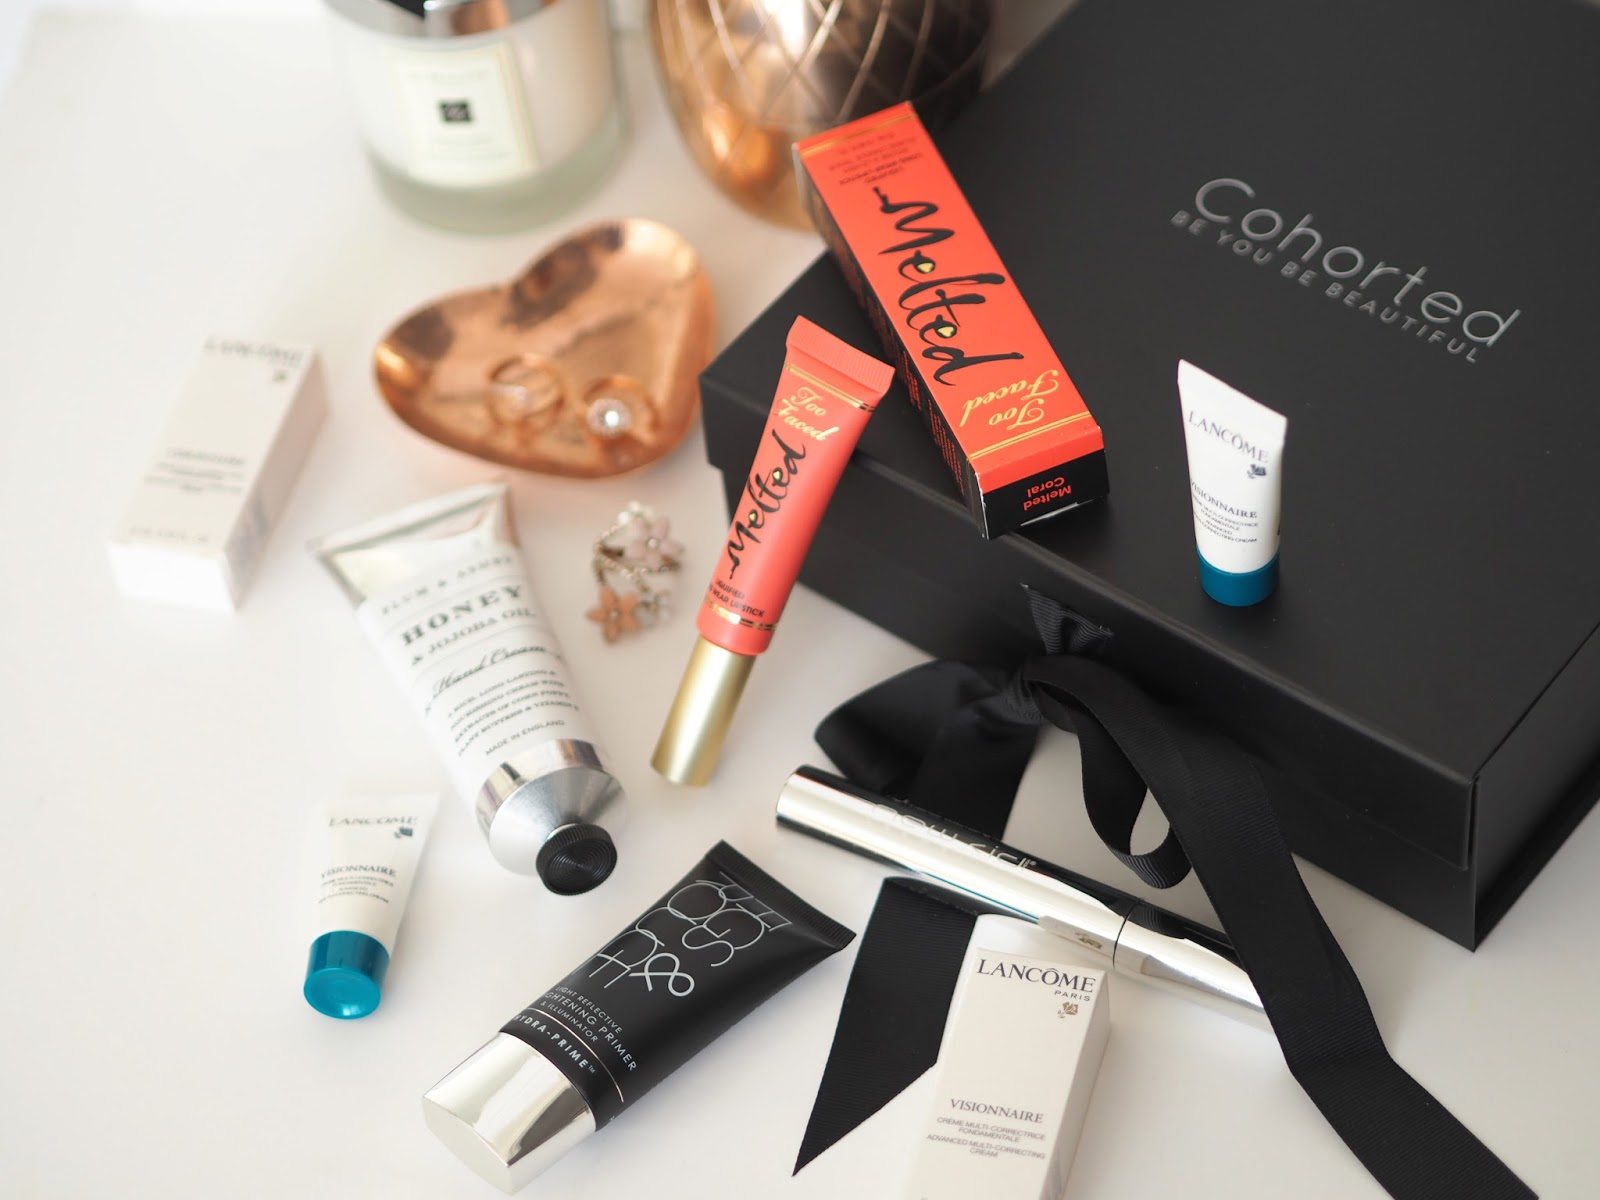 Cohorted Beauty Box: November Edition, Katie Kirk Loves, UK Blogger, Beauty Blogger, Beauty Box, High End Beauty, Luxury Beauty, Beauty Influencer, Make Up Blogger, Skincare Blogger, Cohorted UK, Cohorted Beauty Box Review, Too Faced, Lancome, Figs and Rouge, New CID, Plum and Ashby